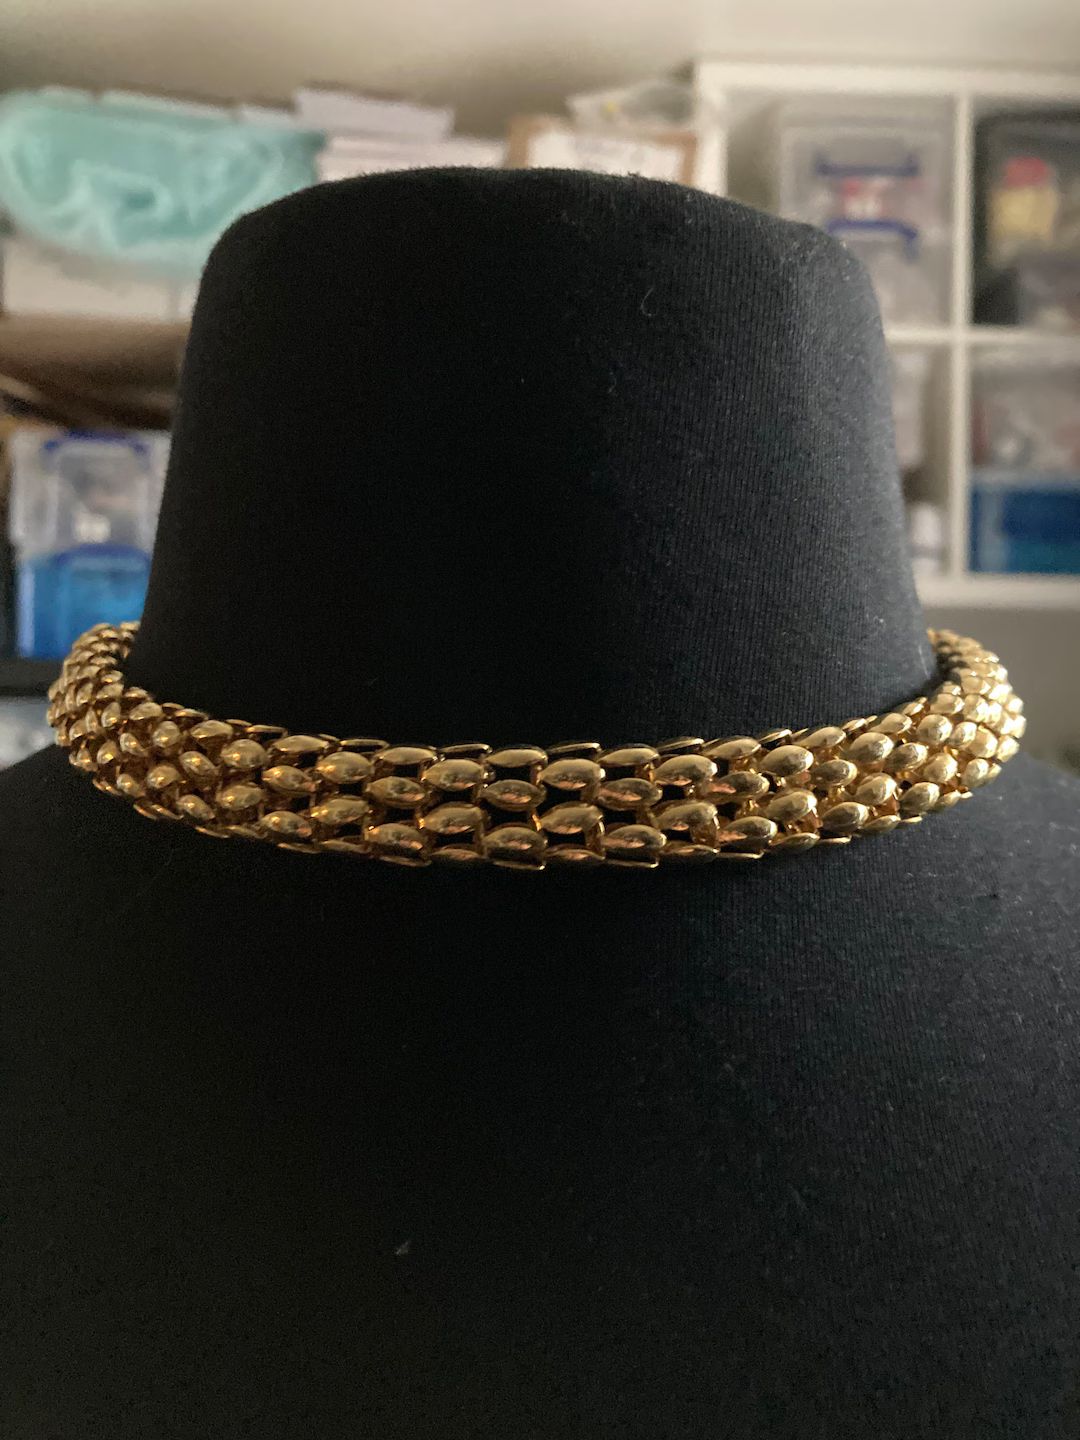 retro gold tone woven panther link collar choker necklace oversized spring ring clasp | Etsy (UK)